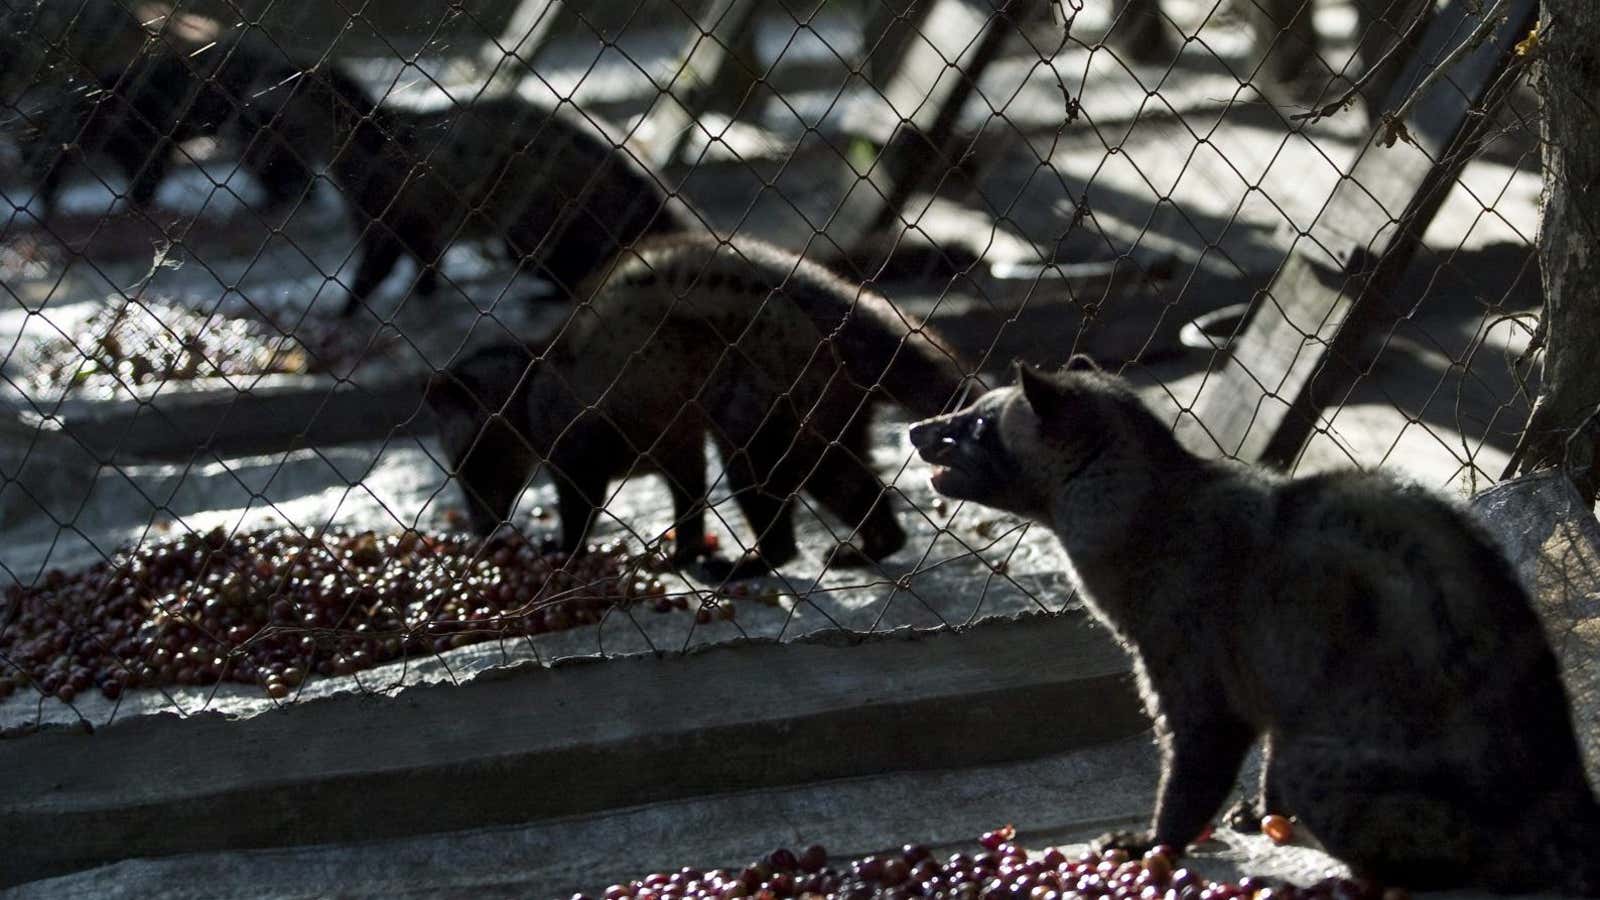 Caged palm civets eating Arabica coffee cherries in a coffee plantation in Indonesia’s East Java province.